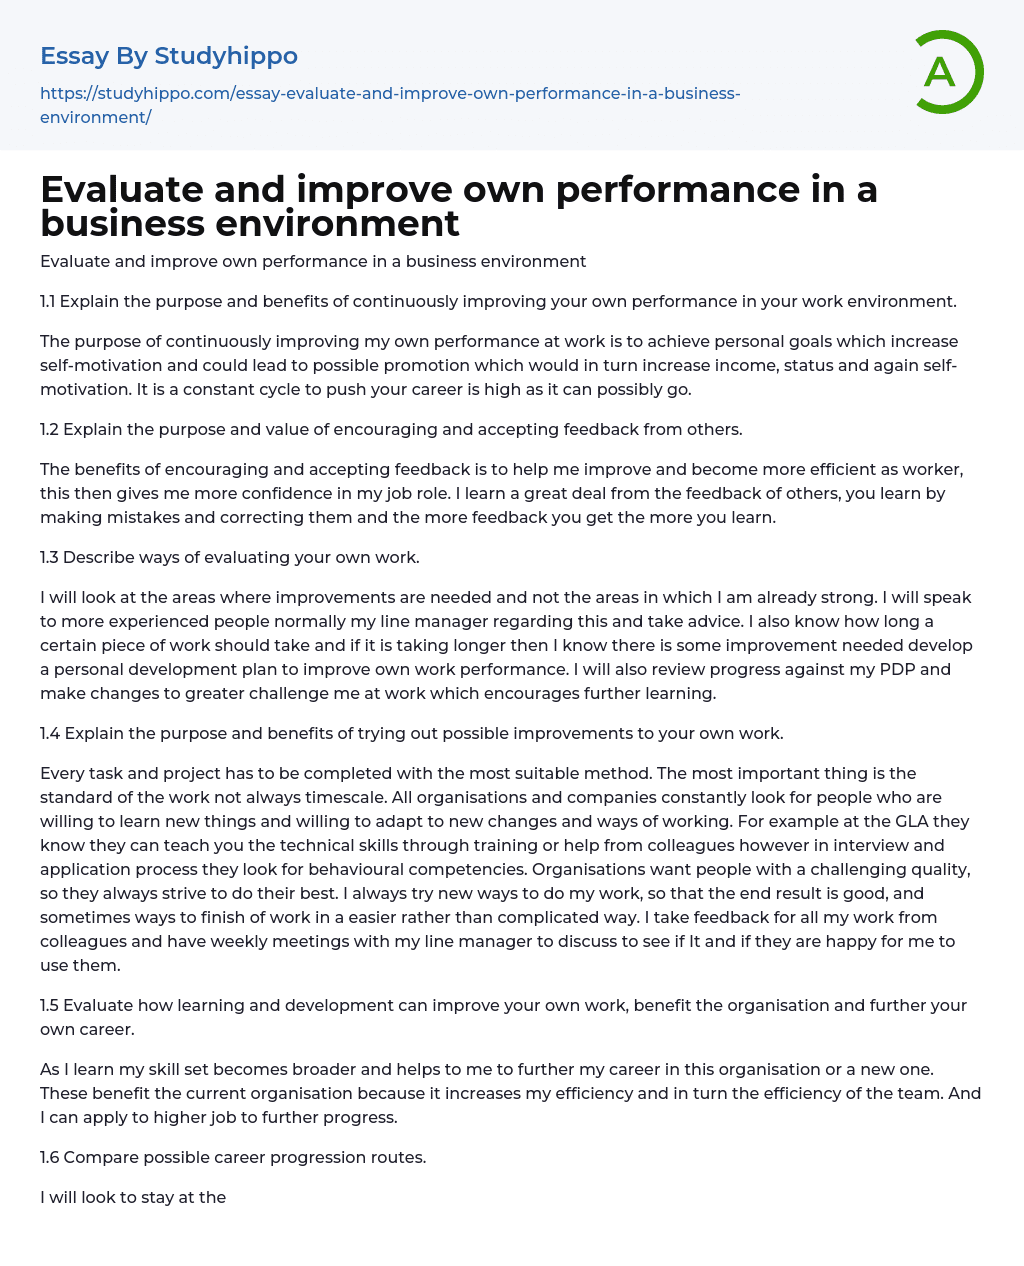 Evaluate and improve own performance in a business environment Essay Example